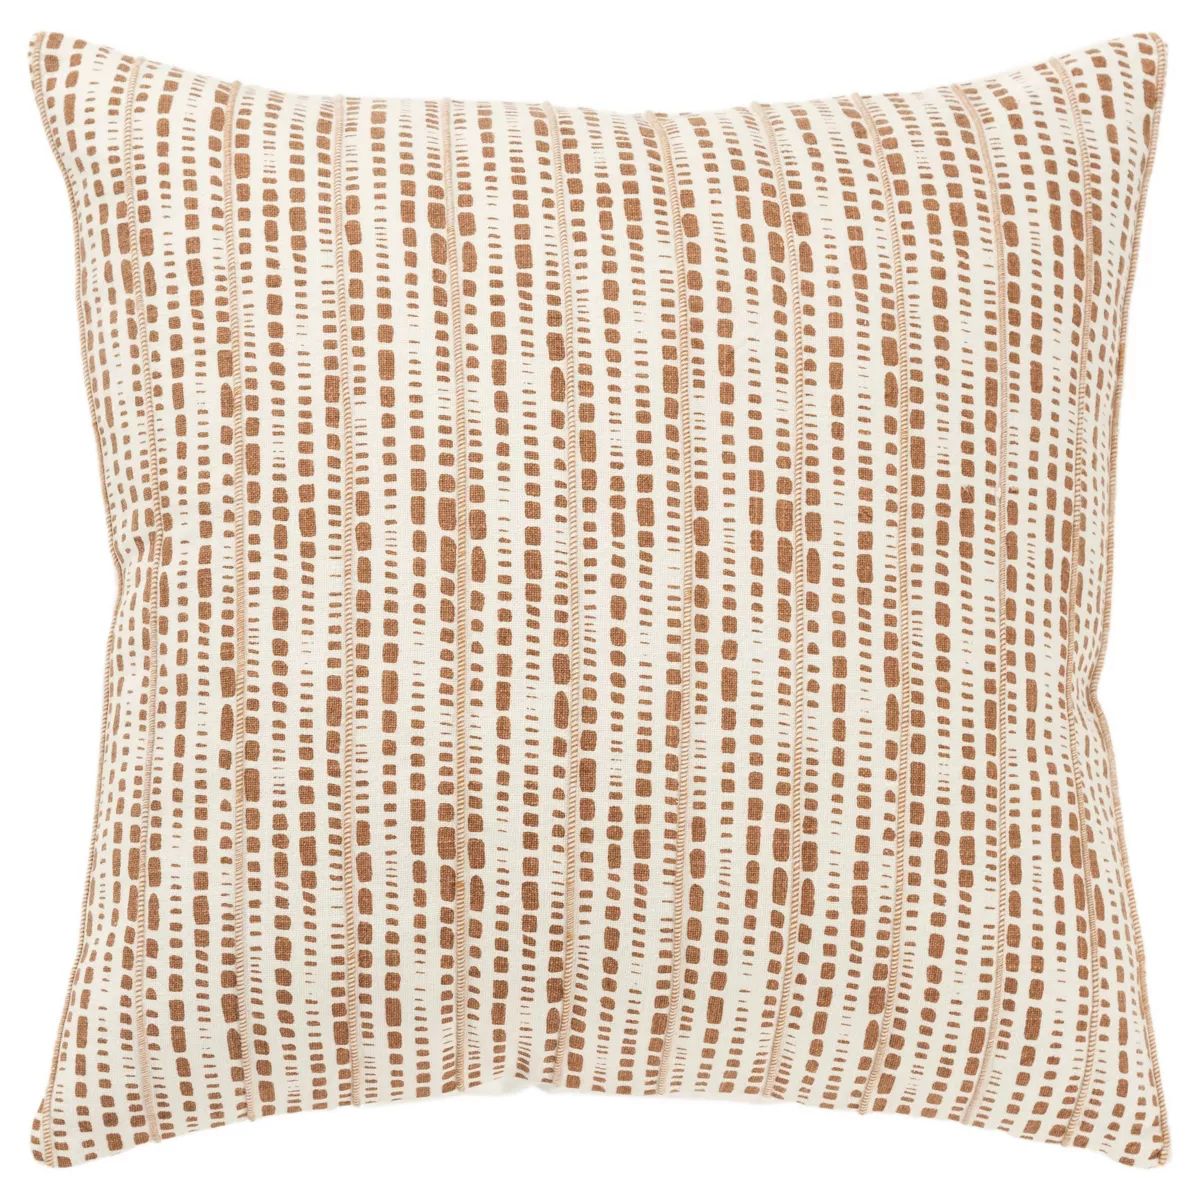 20"x20" Oversize Animal Skin Square Throw Pillow Cover - Rizzy Home | Target